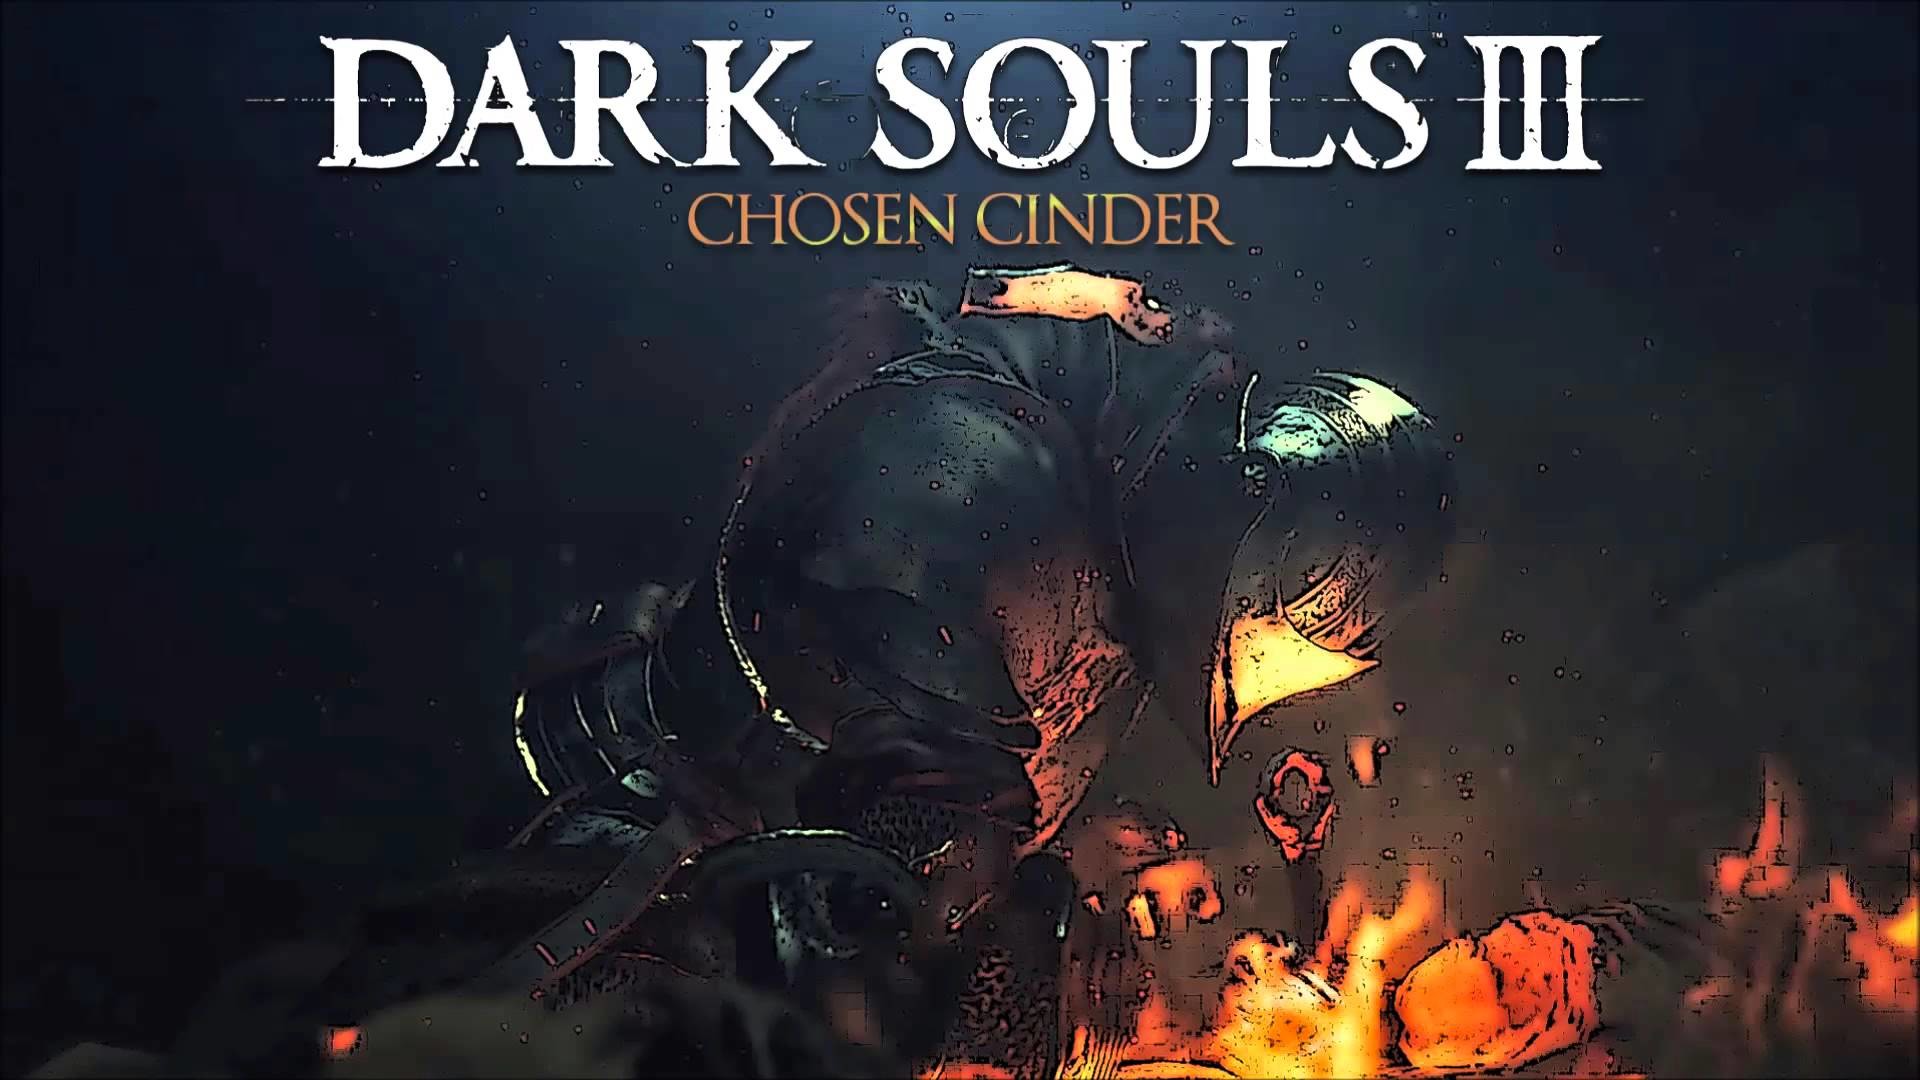 Dark Souls 3 high quality wallpapers